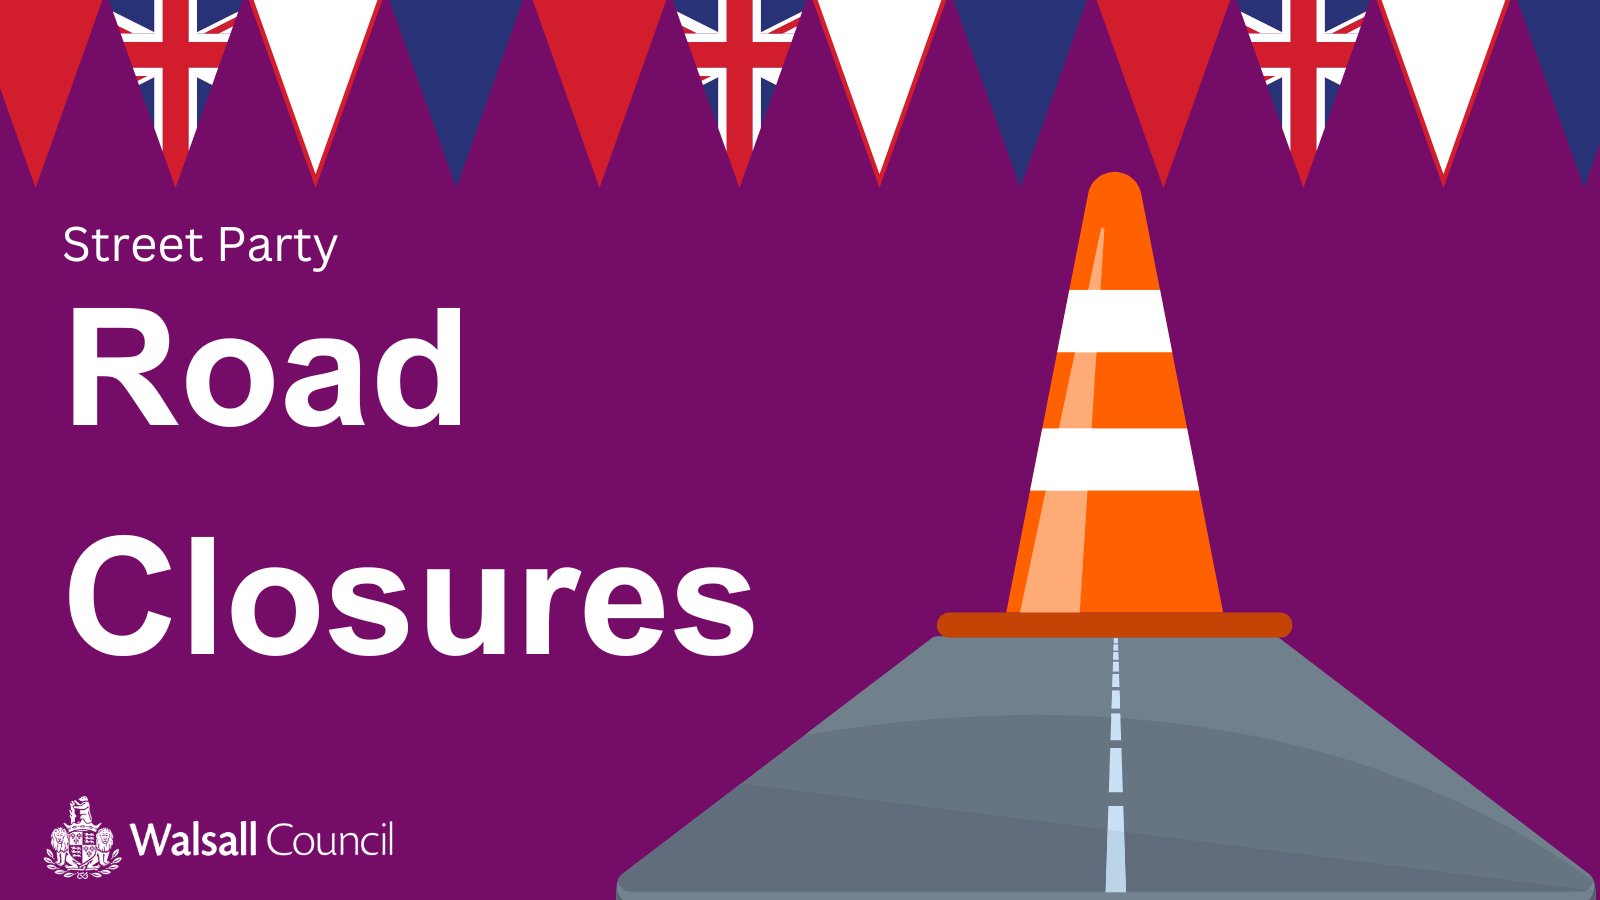 Image says Street Party Road Closures, depicted by designs of a red, blue and white coloured bunting, an orange traffic cone and a road.